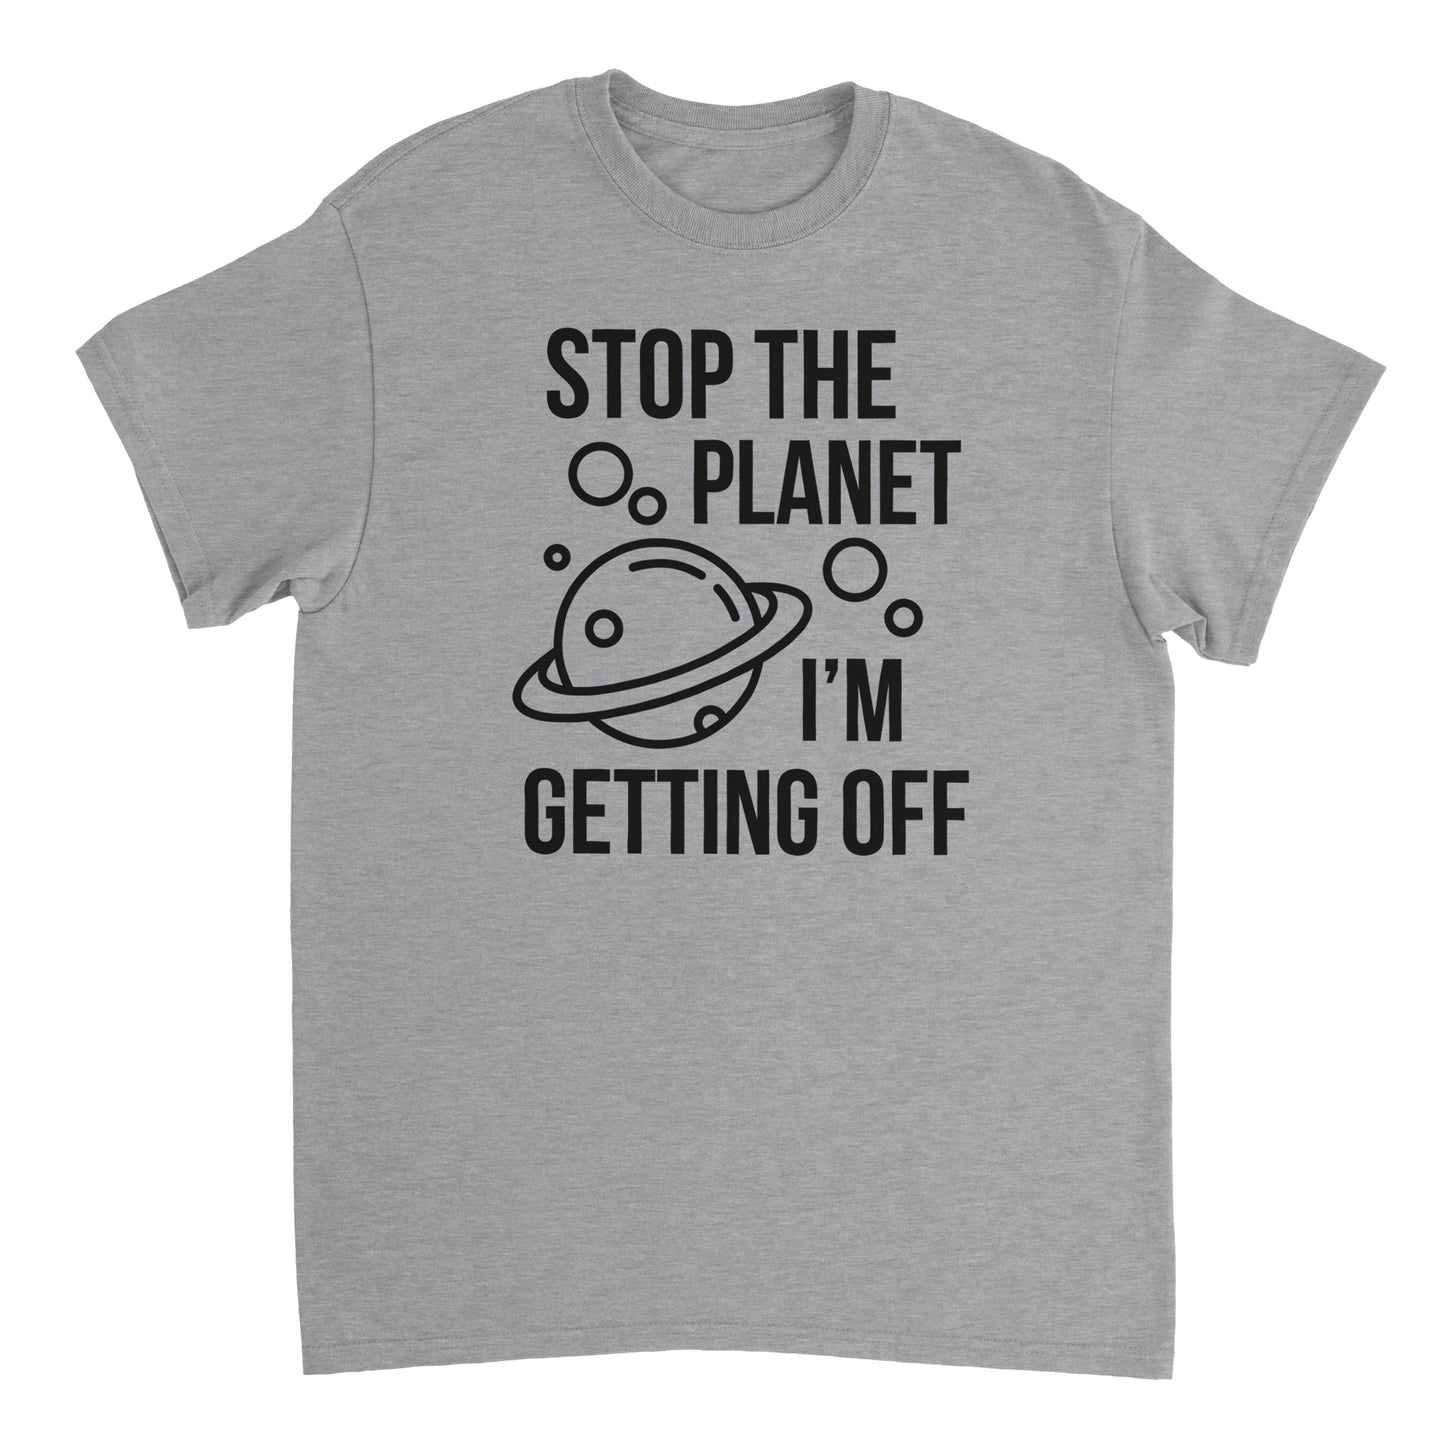 a t - shirt that says stop the planet i'm getting off